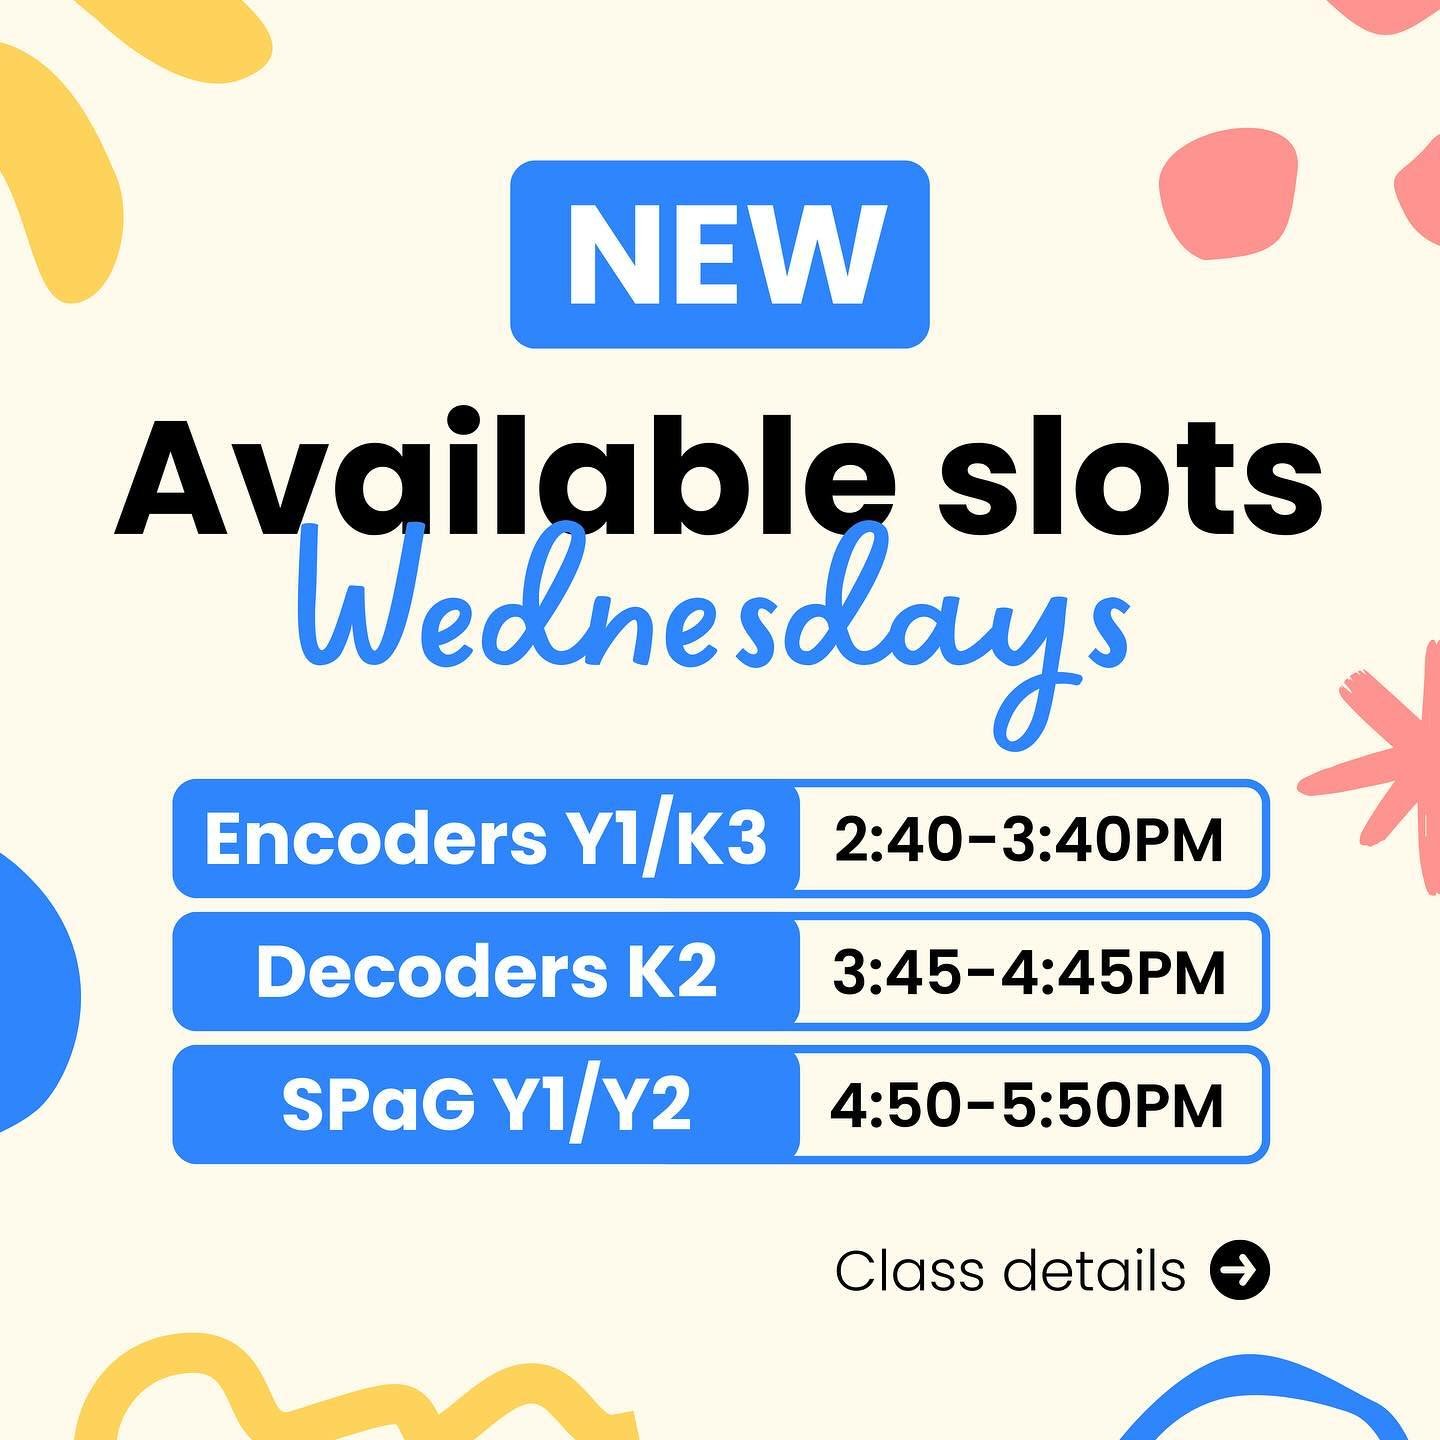 Moms and dads - we've got available slots for Wednesdays starting in April 🥳 GET YOUR FREE ASSESSMENT before slots fill up!

Additional class details:

👧 Decoders / Encoders

Updated Syllabus
✅ follows all British curriculum requirements 
✅ added A